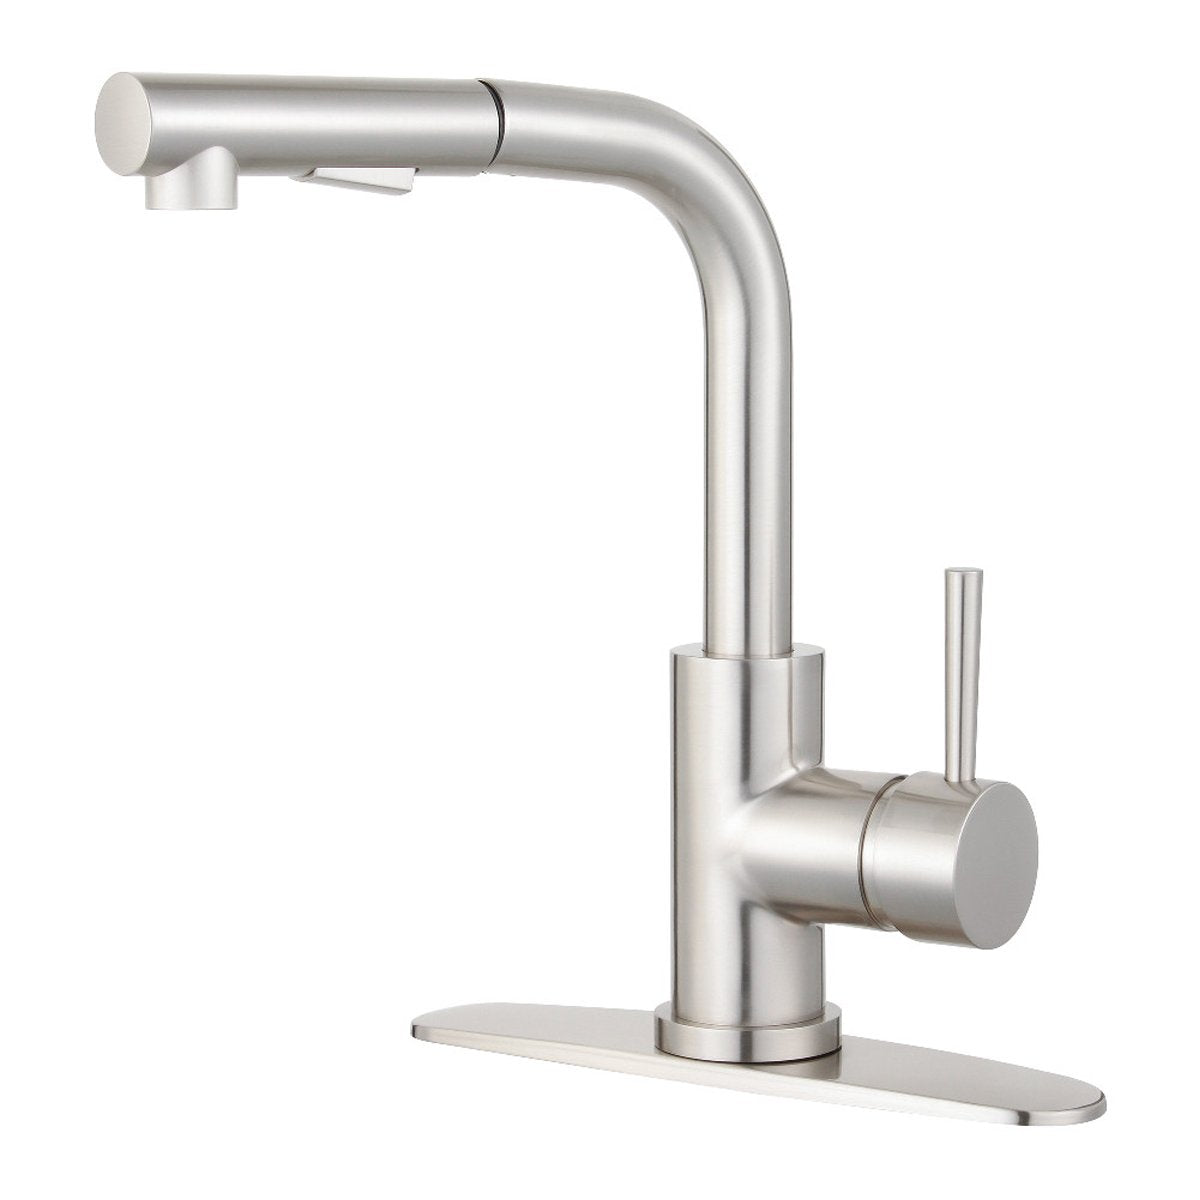 Kingston Brass Gourmetier Concord Single-Handle Kitchen Faucet with Pull-Out Sprayer